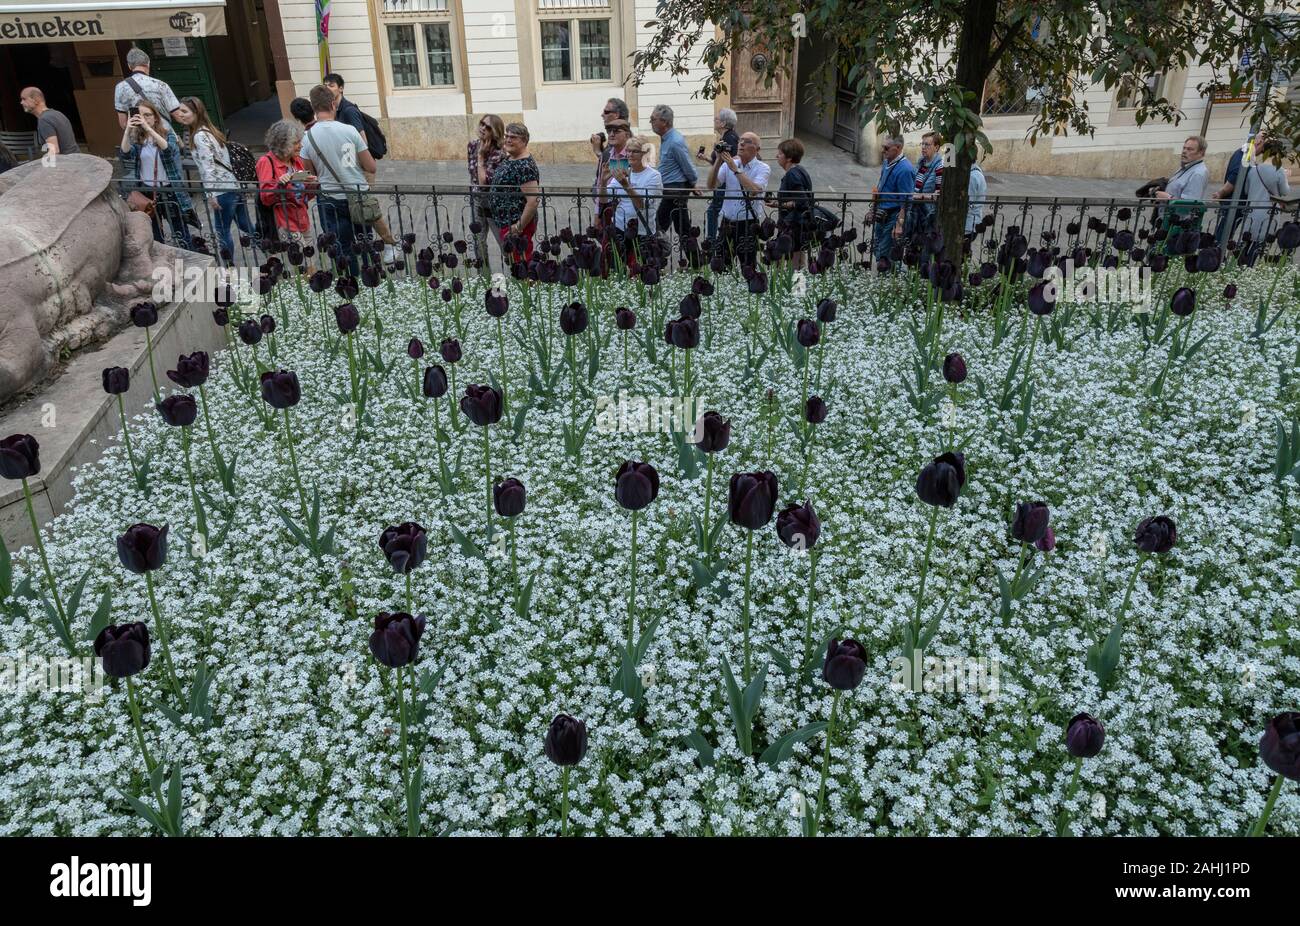 The dark purple tulip, Tulip 'Queen of the Night', planted with white forgert-me-not, Myosotis. Central Zagreb, Croatia. Stock Photo